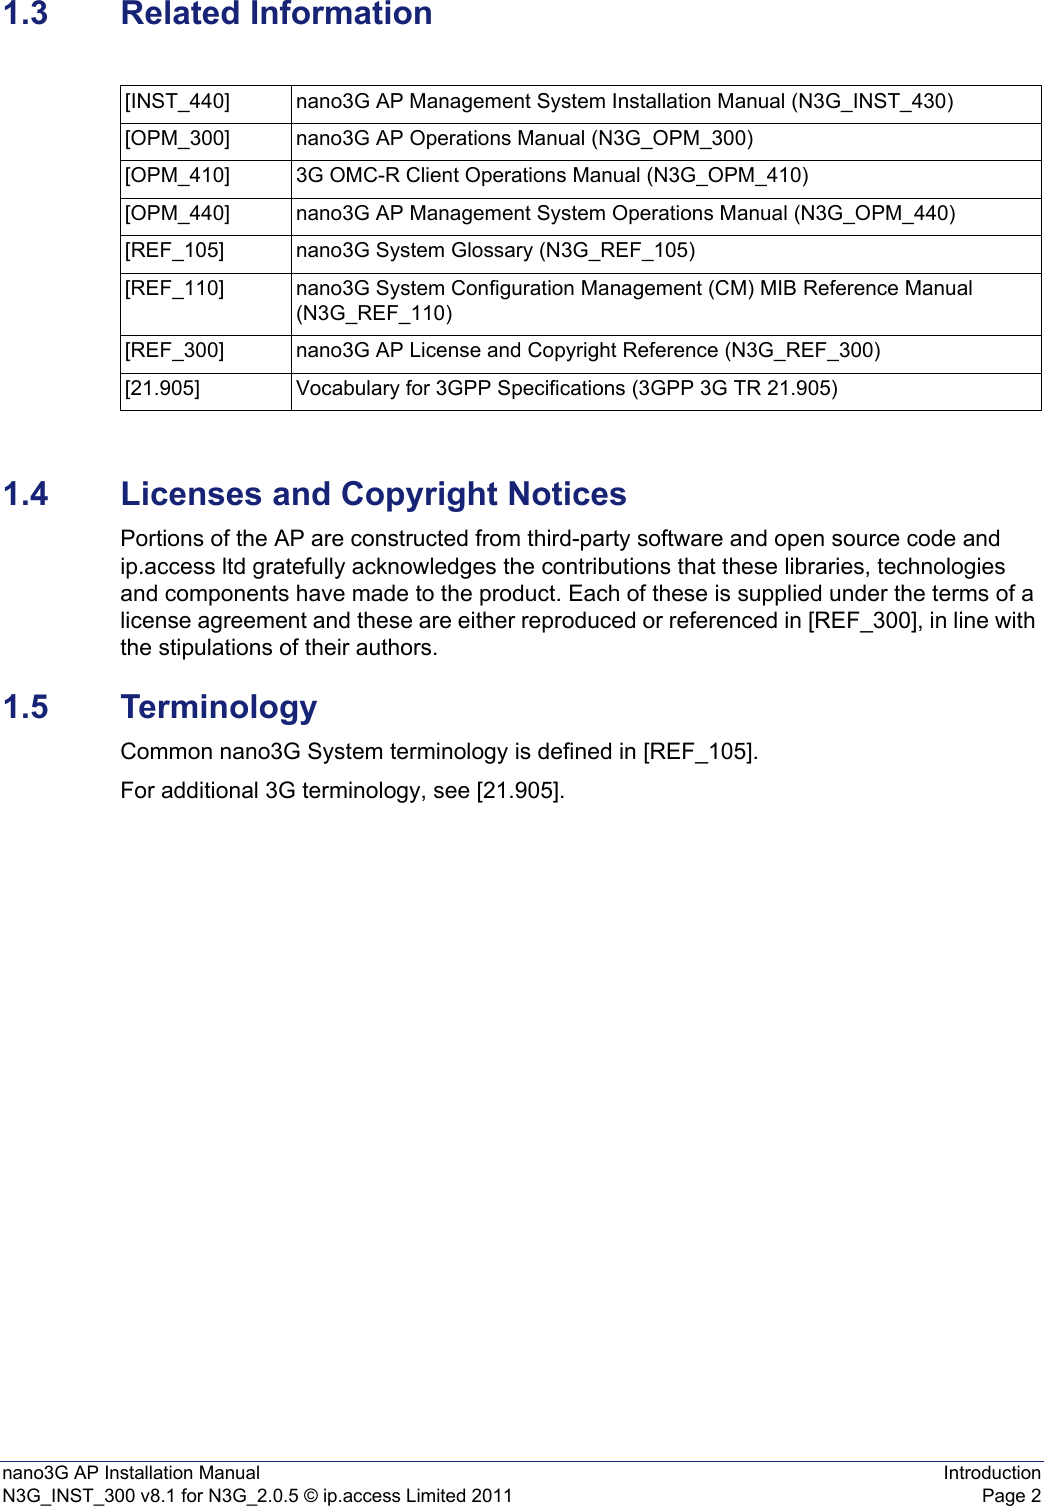 nano3G AP Installation Manual IntroductionN3G_INST_300 v8.1 for N3G_2.0.5 © ip.access Limited 2011 Page 21.3 Related Information1.4 Licenses and Copyright NoticesPortions of the AP are constructed from third-party software and open source code and ip.access ltd gratefully acknowledges the contributions that these libraries, technologies and components have made to the product. Each of these is supplied under the terms of a license agreement and these are either reproduced or referenced in [REF_300], in line with the stipulations of their authors.1.5 TerminologyCommon nano3G System terminology is defined in [REF_105].For additional 3G terminology, see [21.905].[INST_440] nano3G AP Management System Installation Manual (N3G_INST_430)[OPM_300] nano3G AP Operations Manual (N3G_OPM_300)[OPM_410] 3G OMC-R Client Operations Manual (N3G_OPM_410)[OPM_440] nano3G AP Management System Operations Manual (N3G_OPM_440)[REF_105] nano3G System Glossary (N3G_REF_105)[REF_110] nano3G System Configuration Management (CM) MIB Reference Manual (N3G_REF_110)[REF_300] nano3G AP License and Copyright Reference (N3G_REF_300)[21.905] Vocabulary for 3GPP Specifications (3GPP 3G TR 21.905)